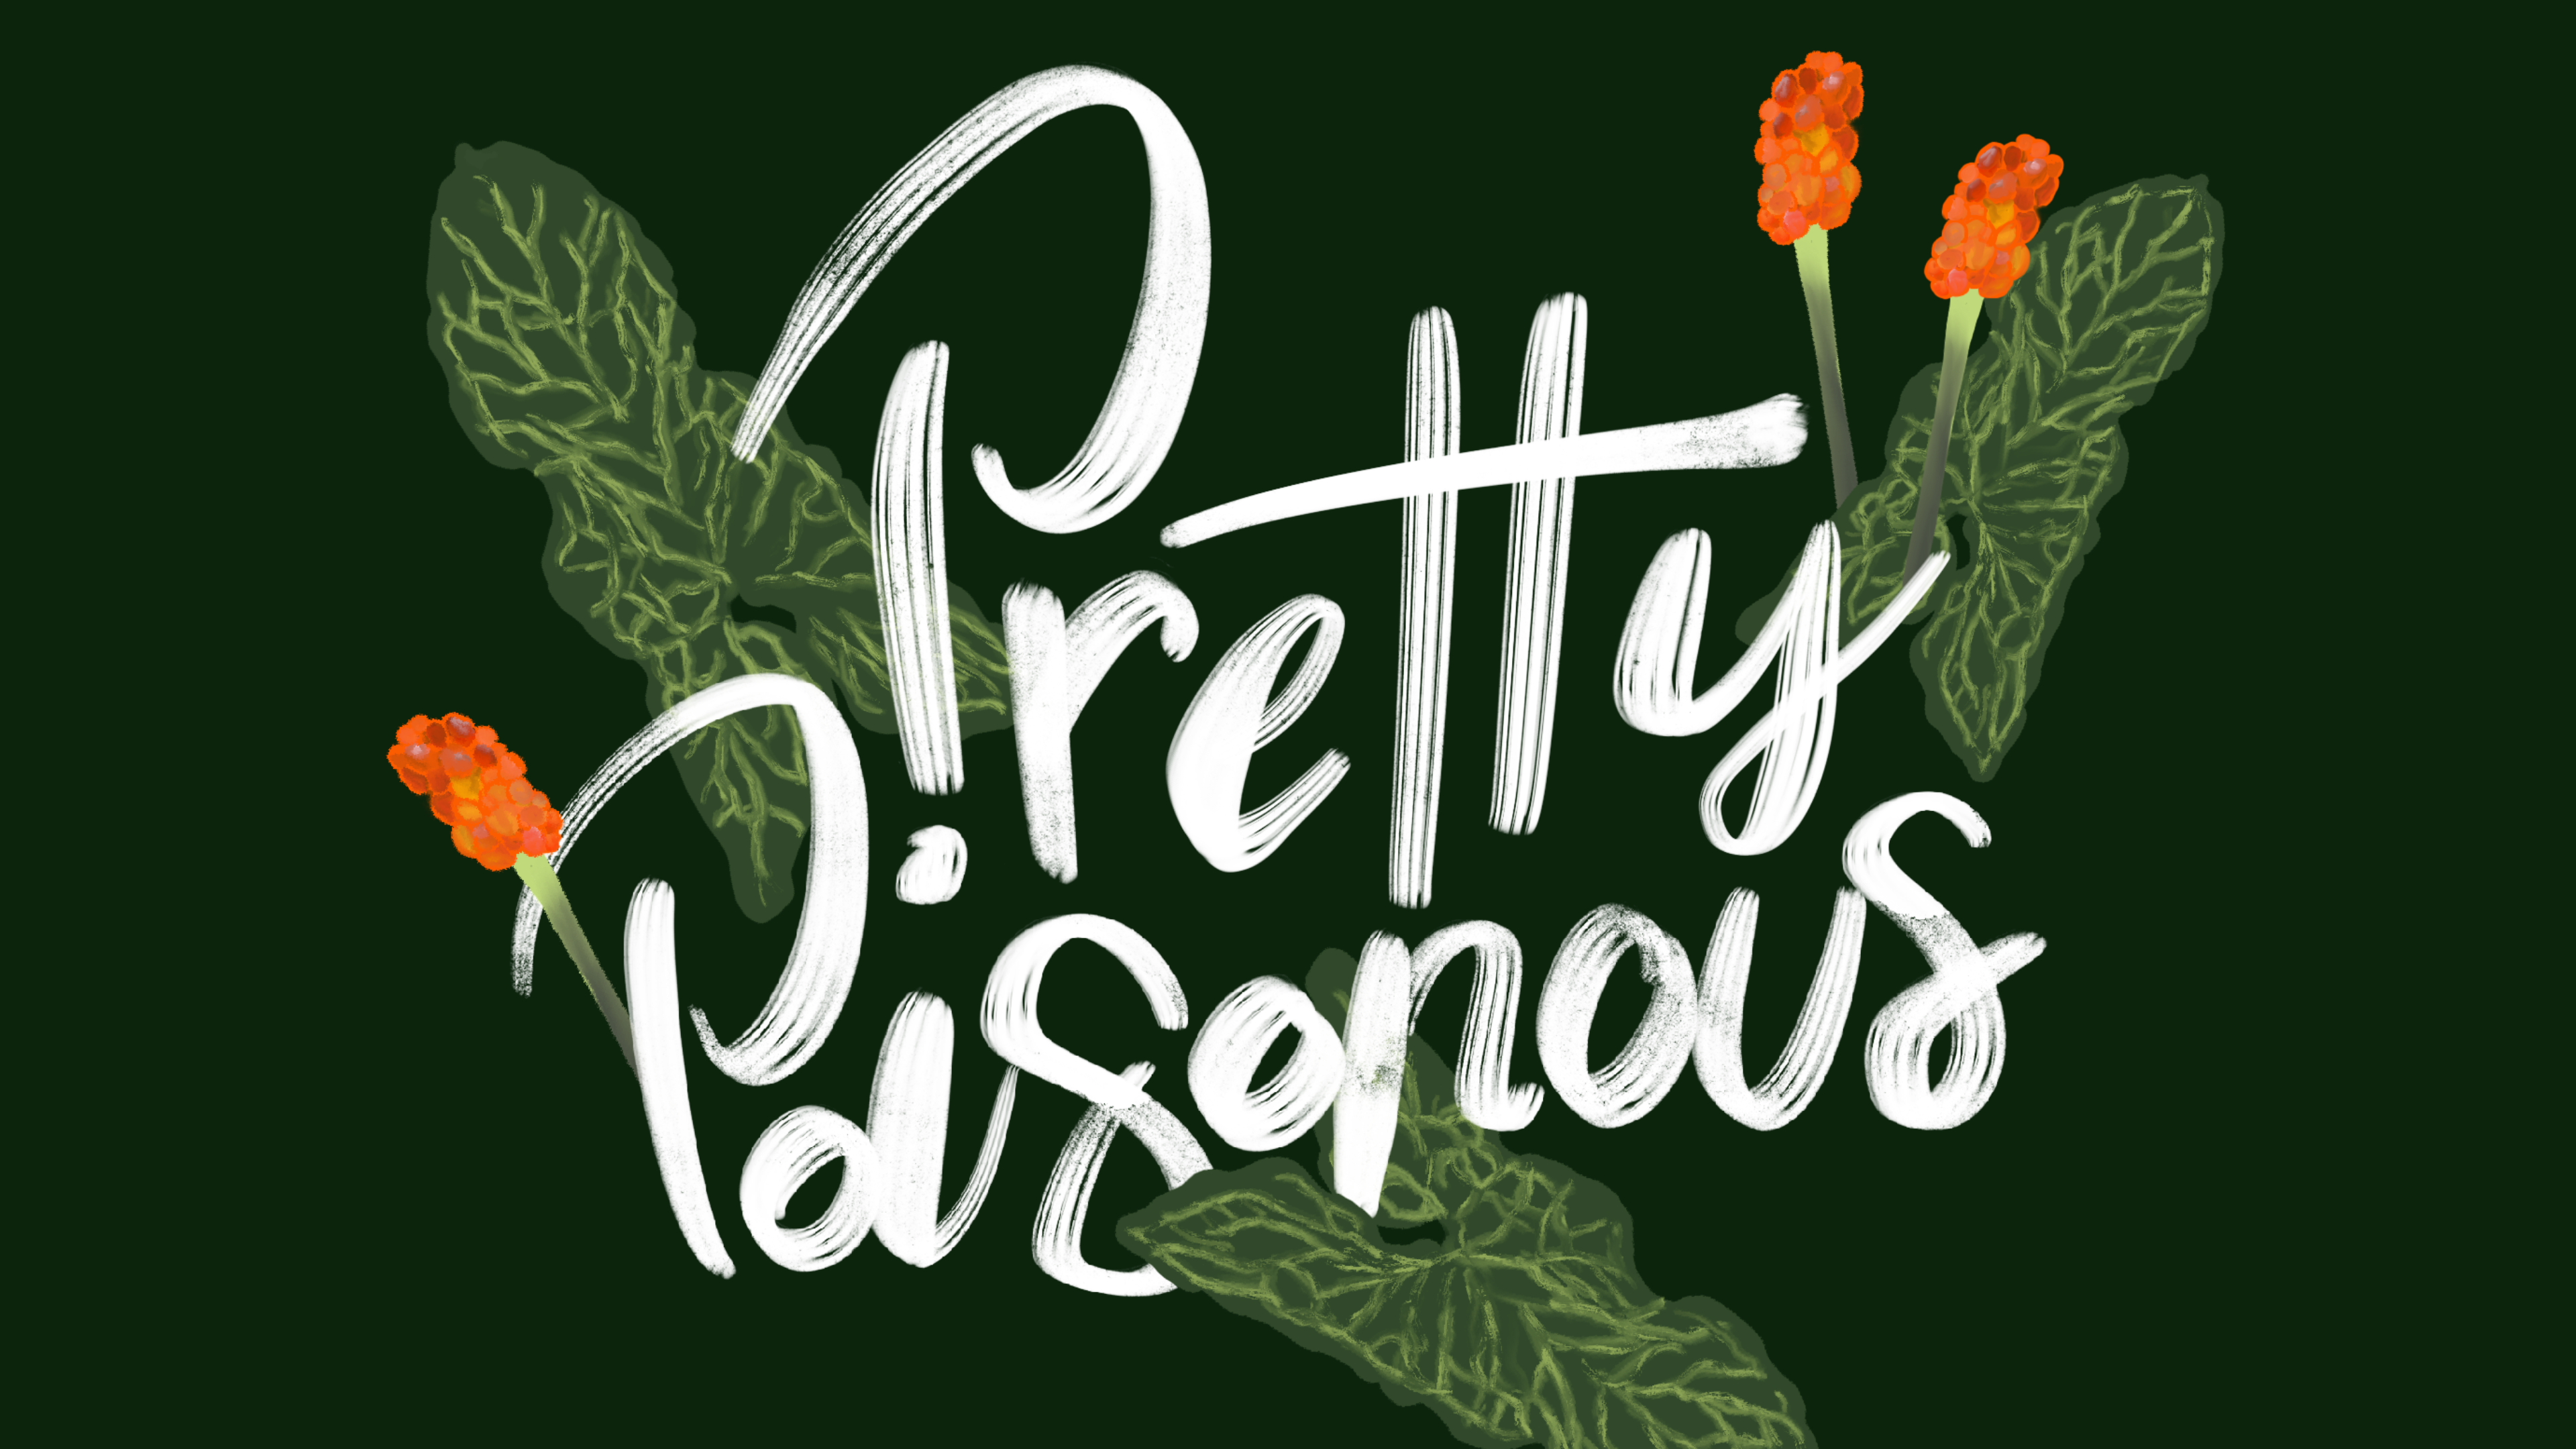 Pretty Poisonous hand lettering surrounded by illustrations of poisonous flowers